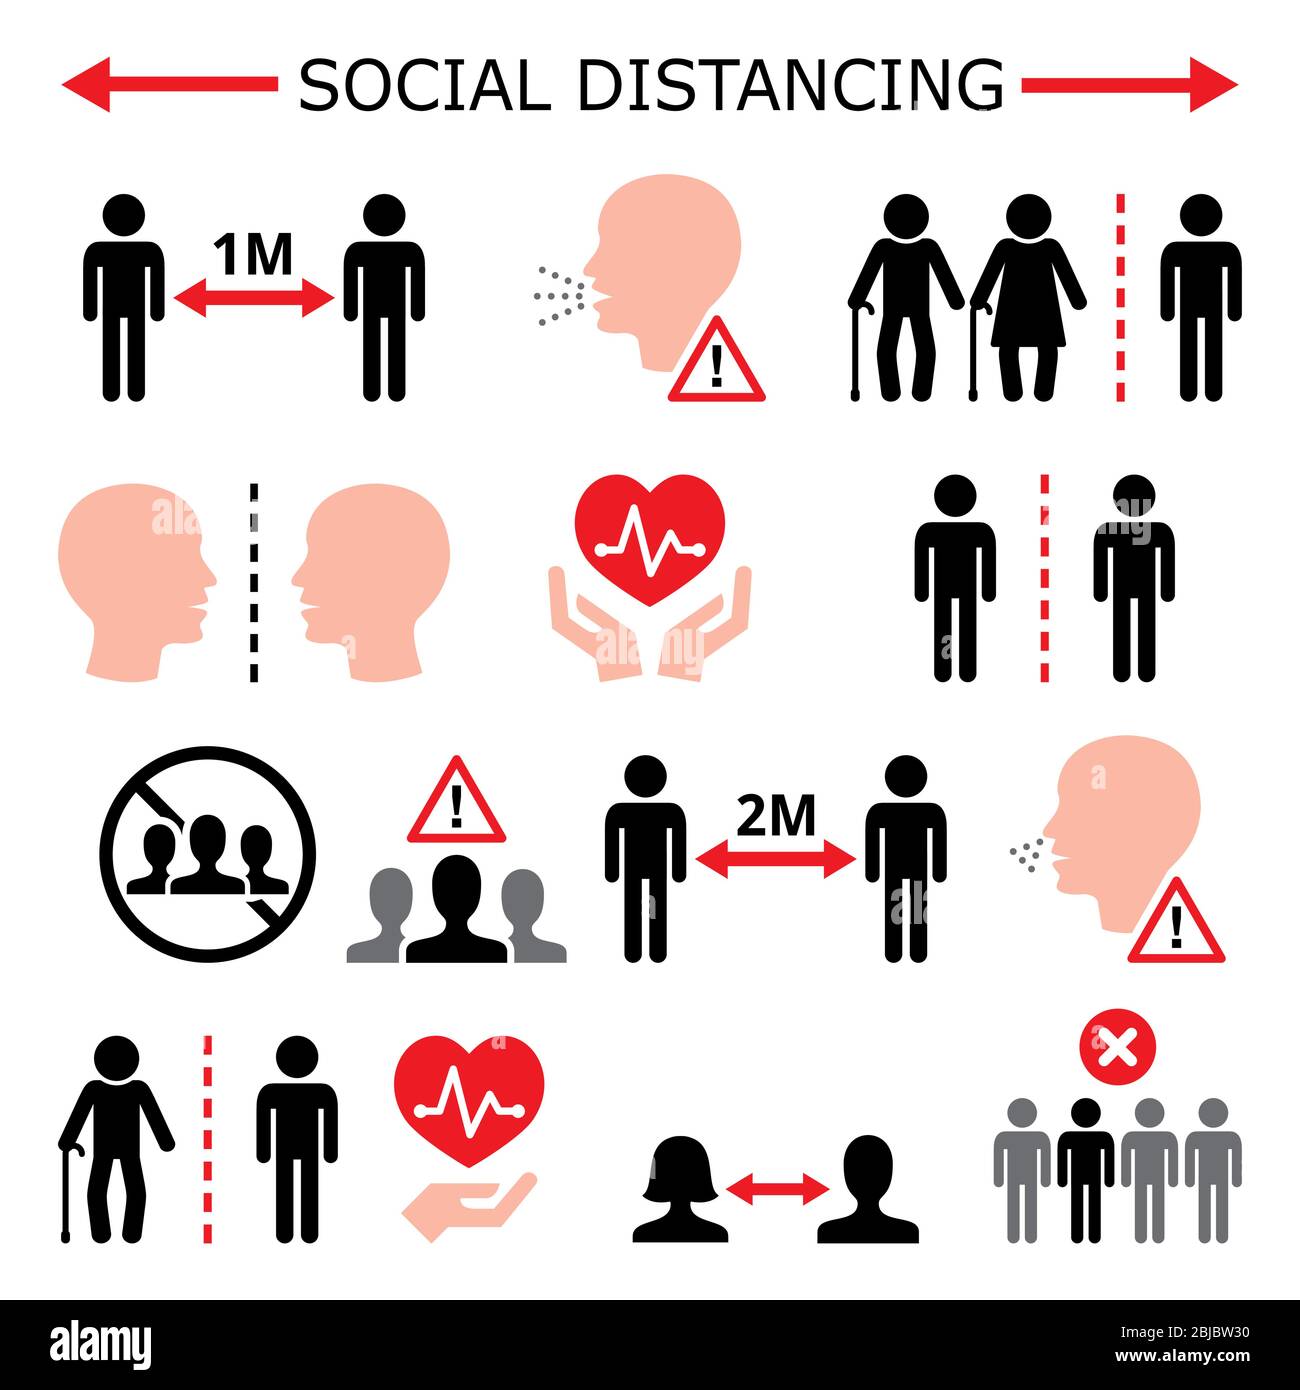 Social distancing during pandemic or epidemic vector color icons set, keeping a distance between people   Increasing the physical space between people Stock Vector